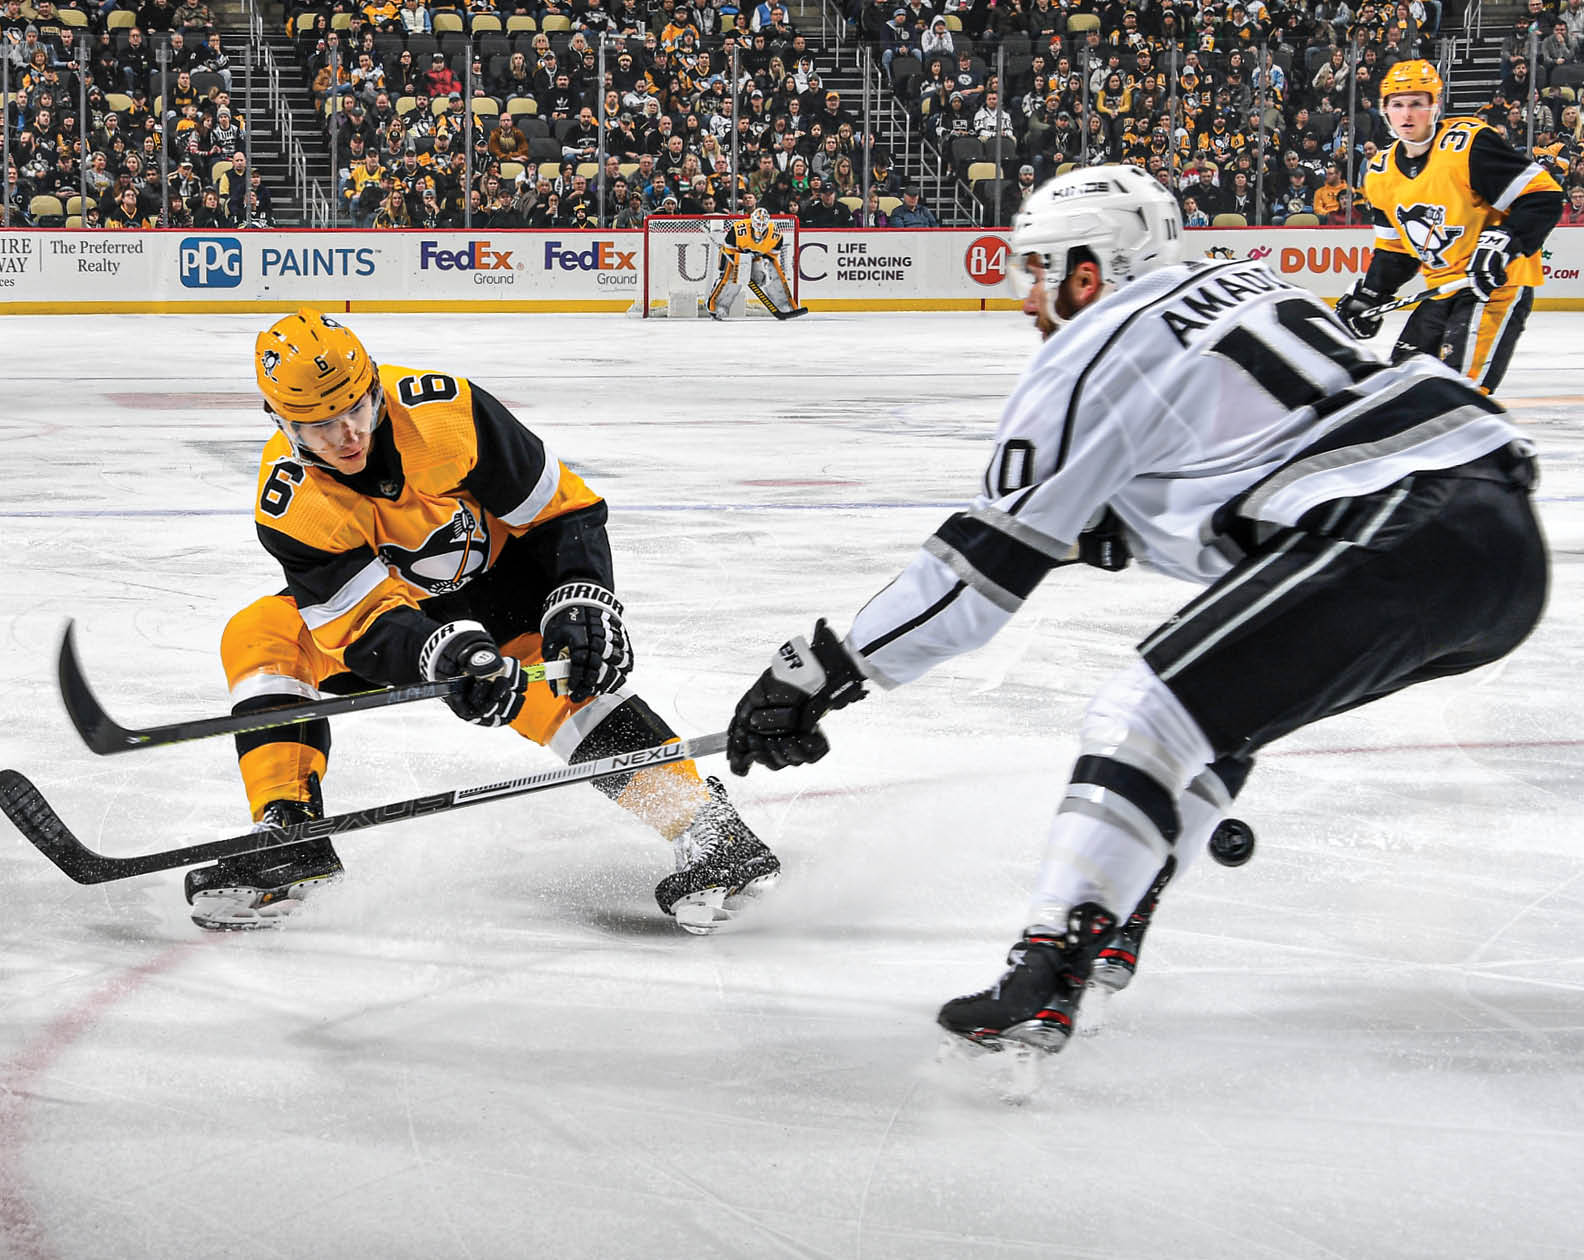 December 14, 2019 - Pittsburgh Penguins vs Los Angeles Kings at PPG Paints Arena  Pittsburgh won the game 5-4 in a shootout 